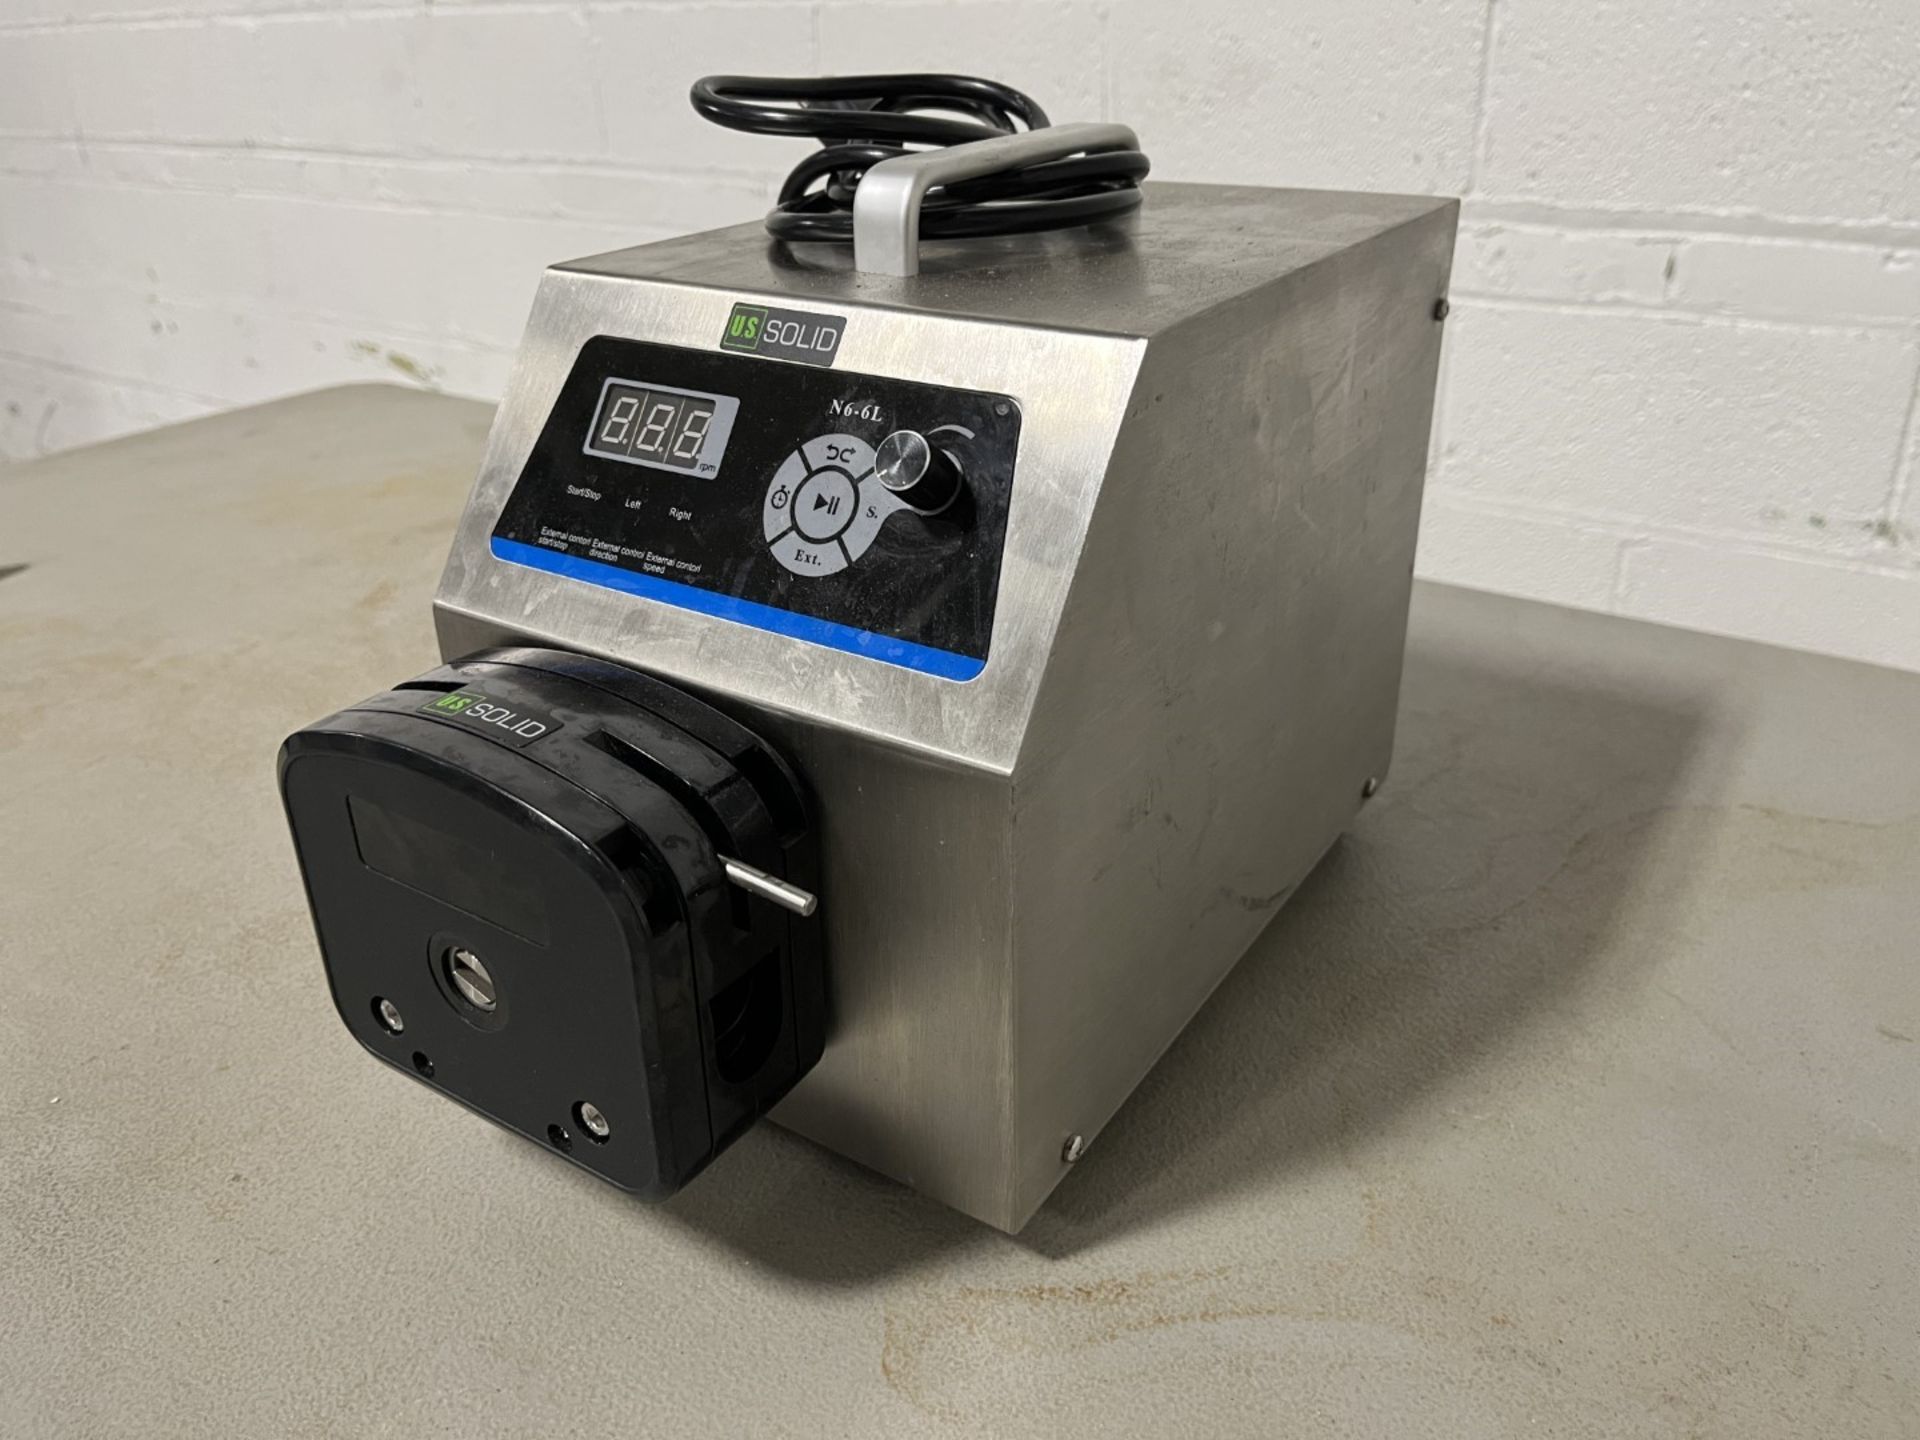 US Solid Peristaltic Pump - Image 4 of 6